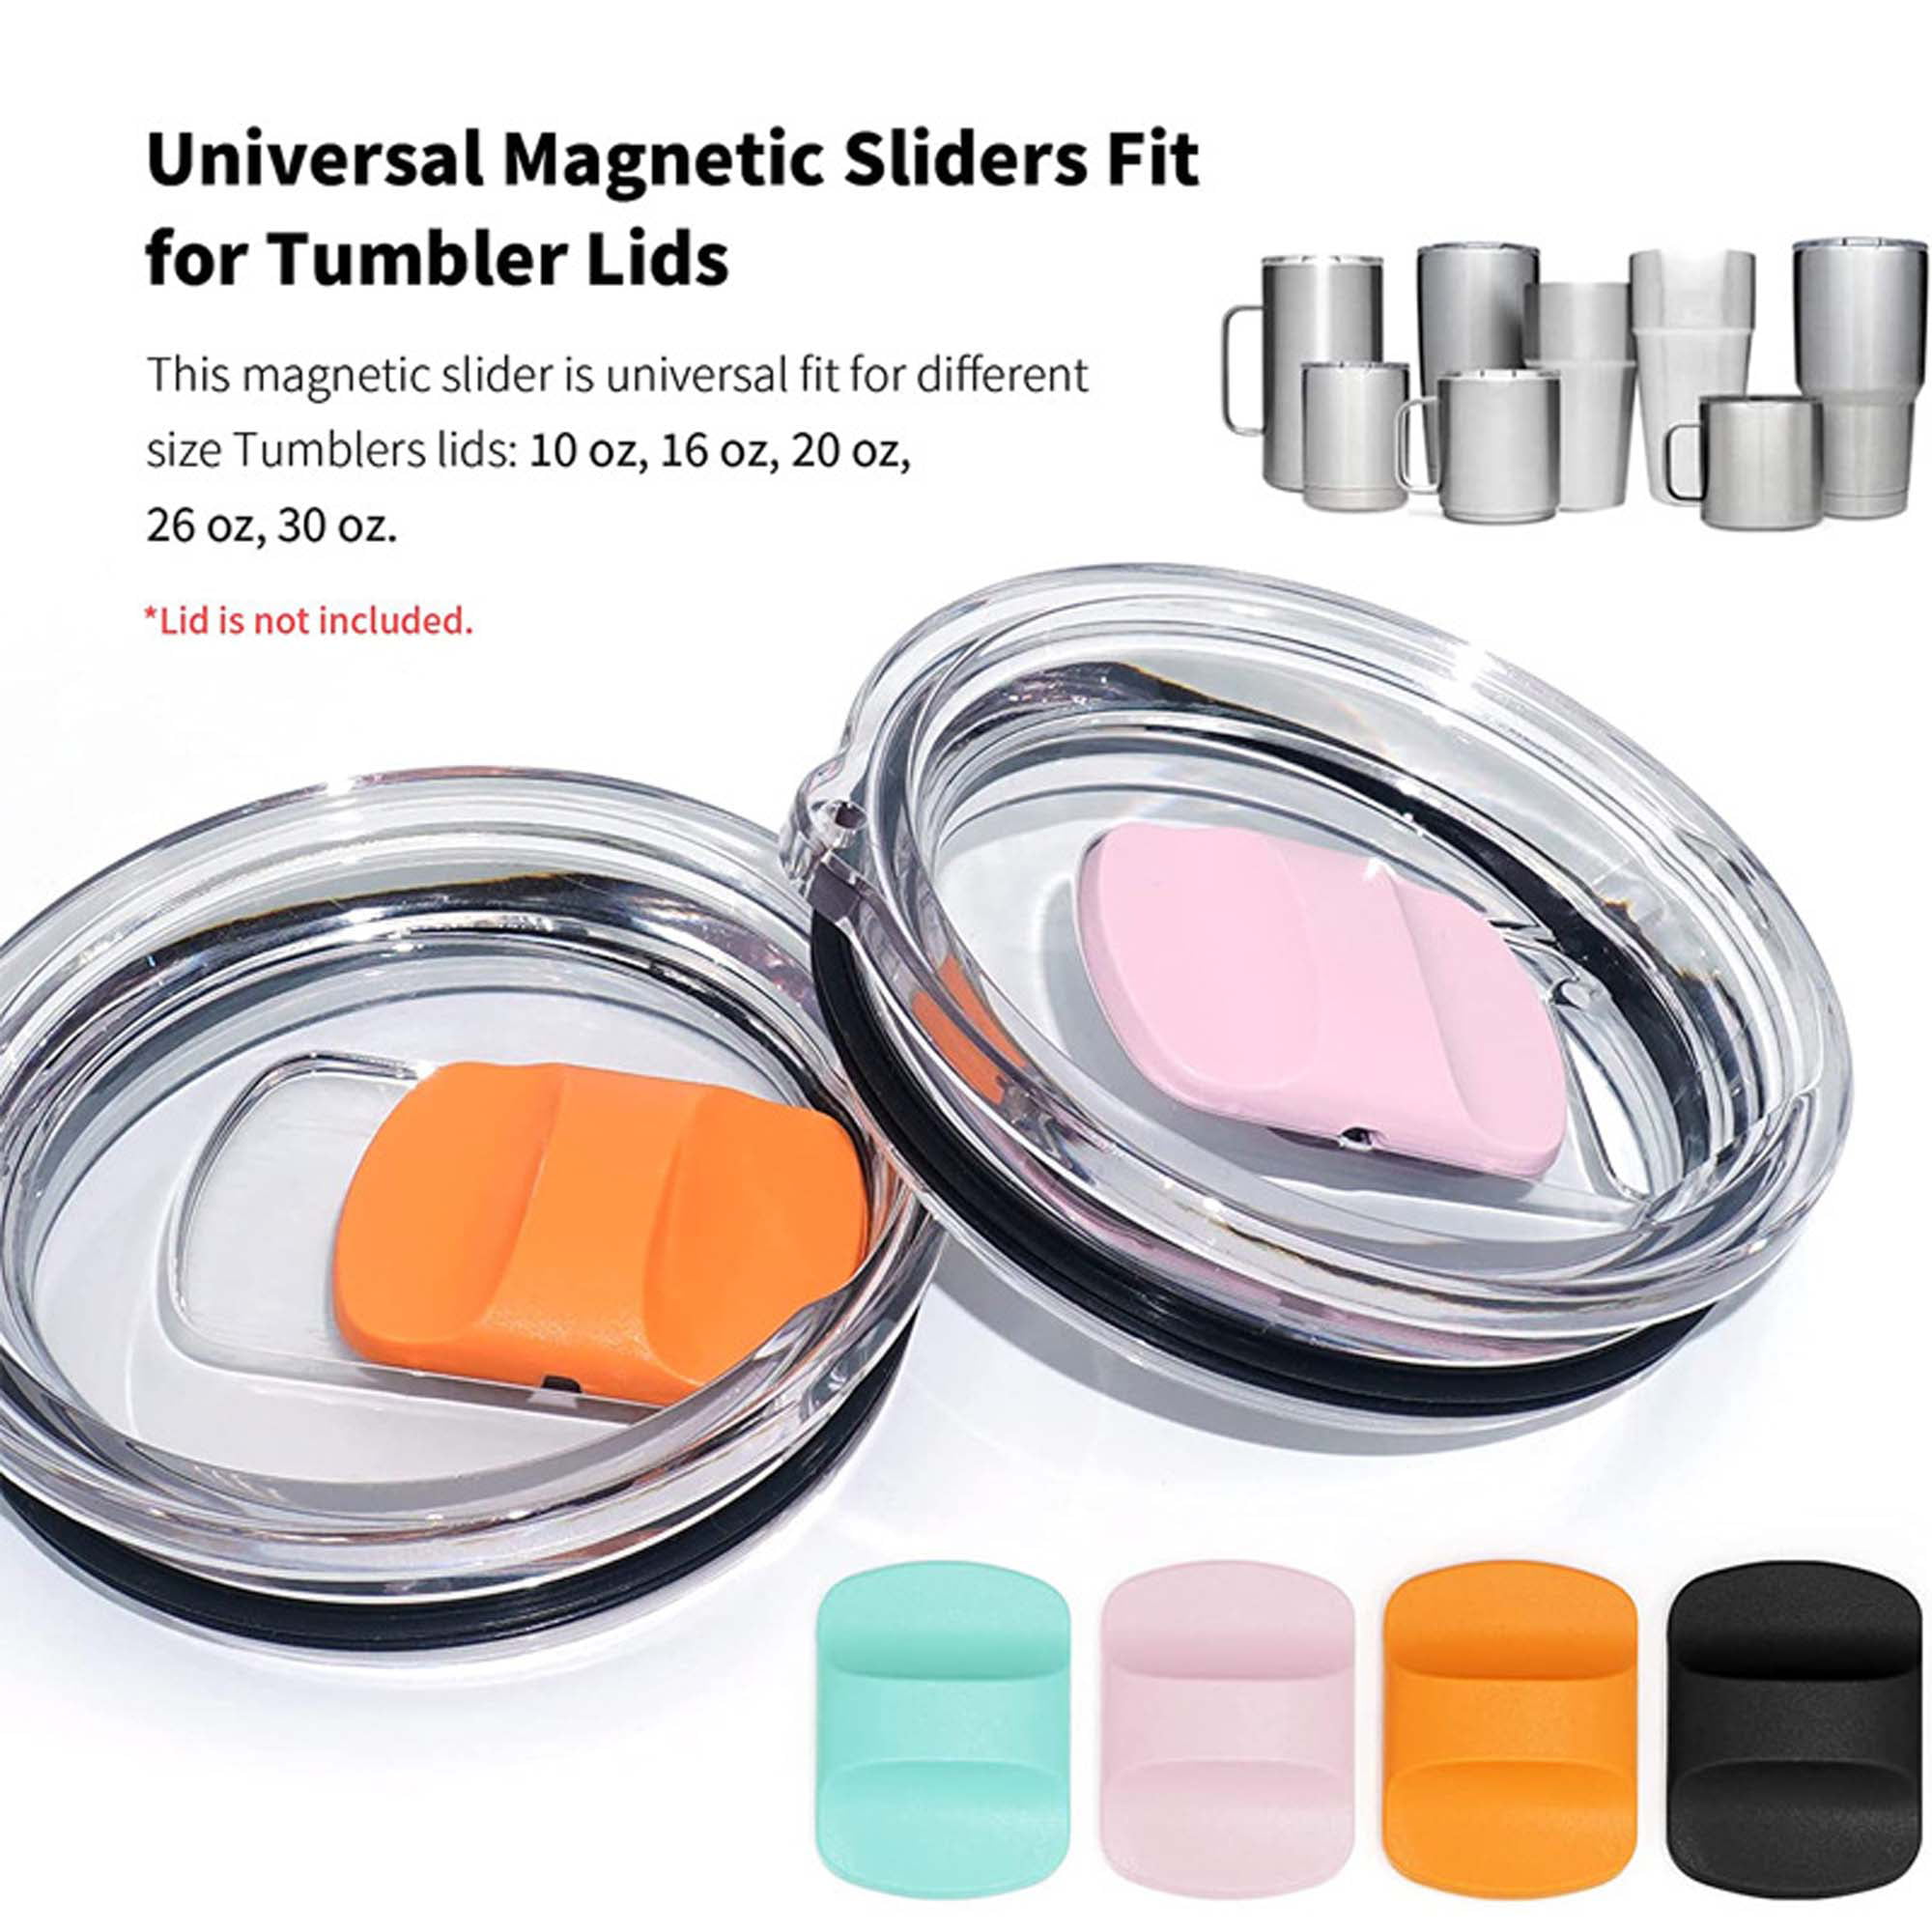 Covers For Yeti Magnetic Slider Replacement, 2-Pack Spill-Proof Maglsider  Fit For Yeti Rambler 20 oz…See more Covers For Yeti Magnetic Slider